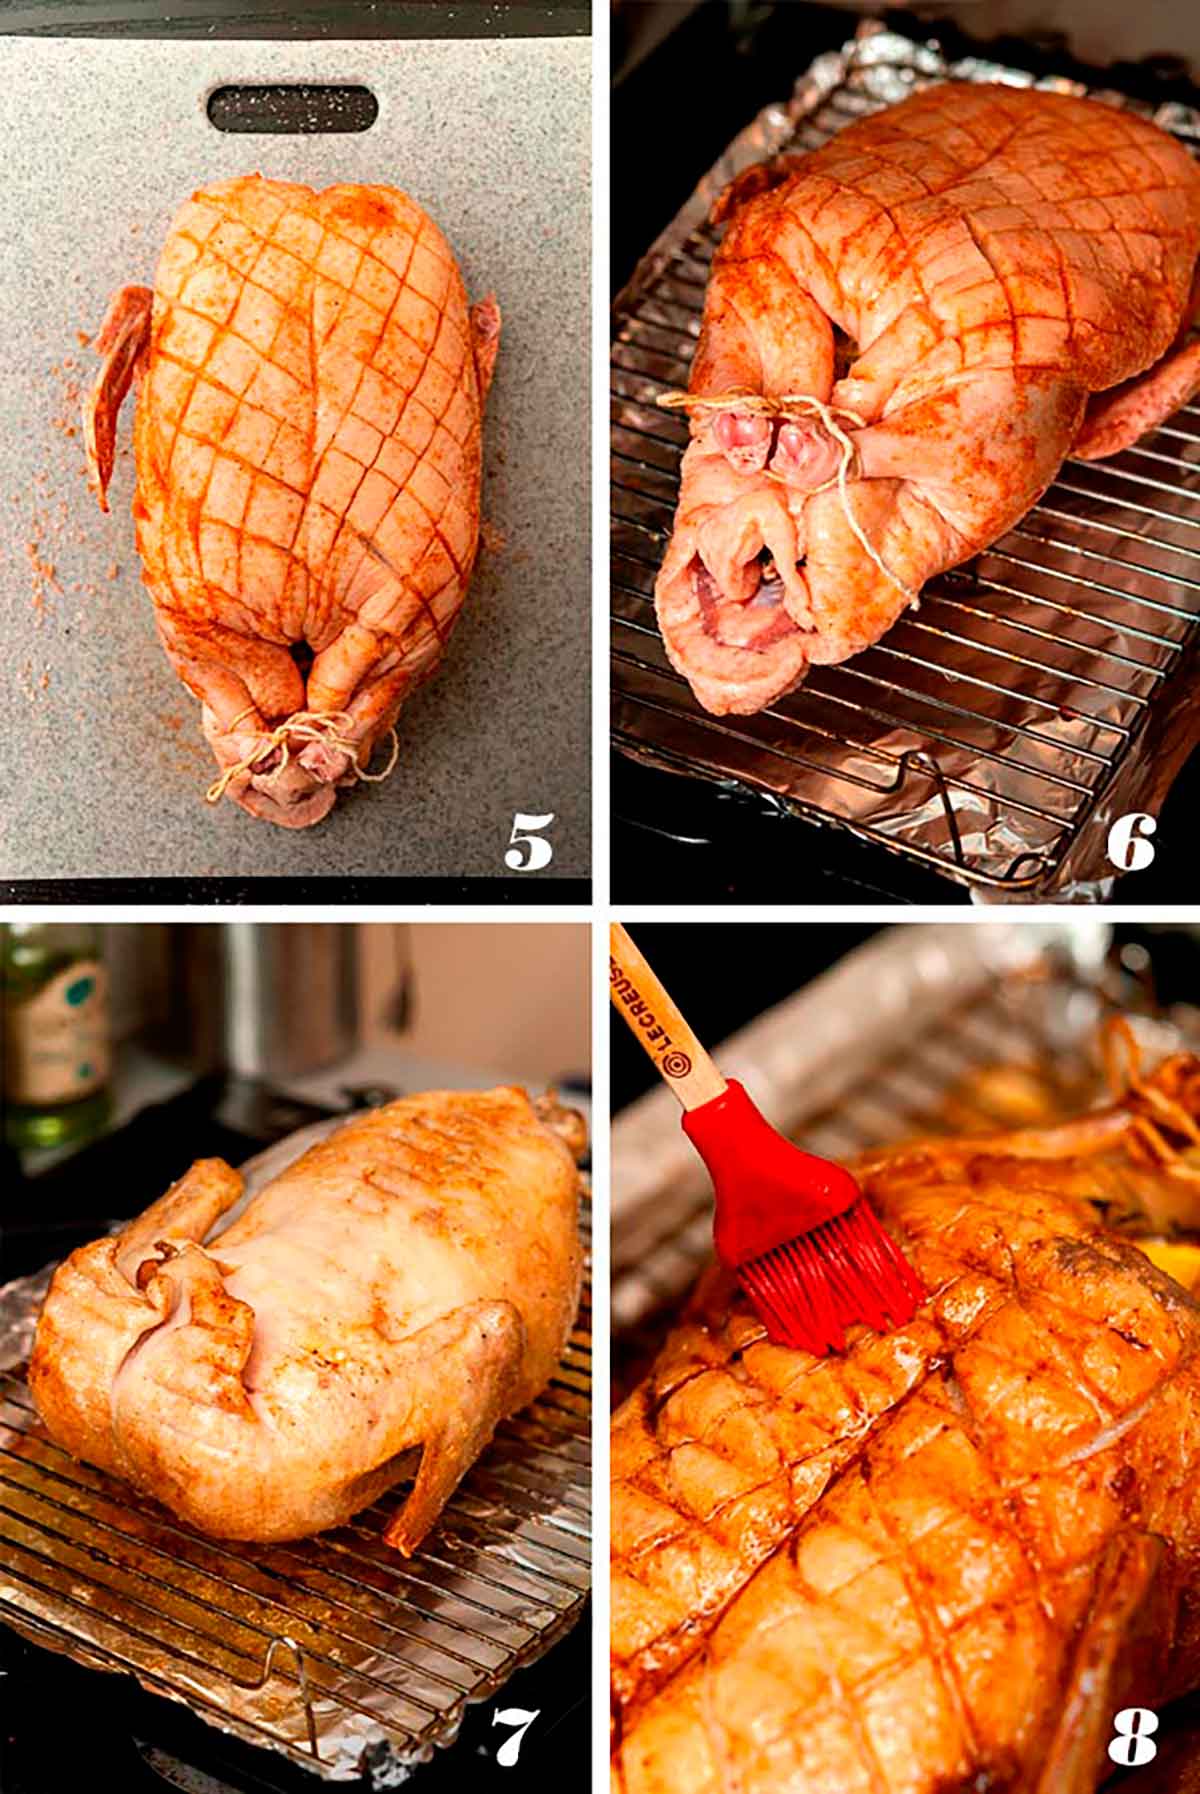 A collage of 4 numbered images showing how to roast duck.